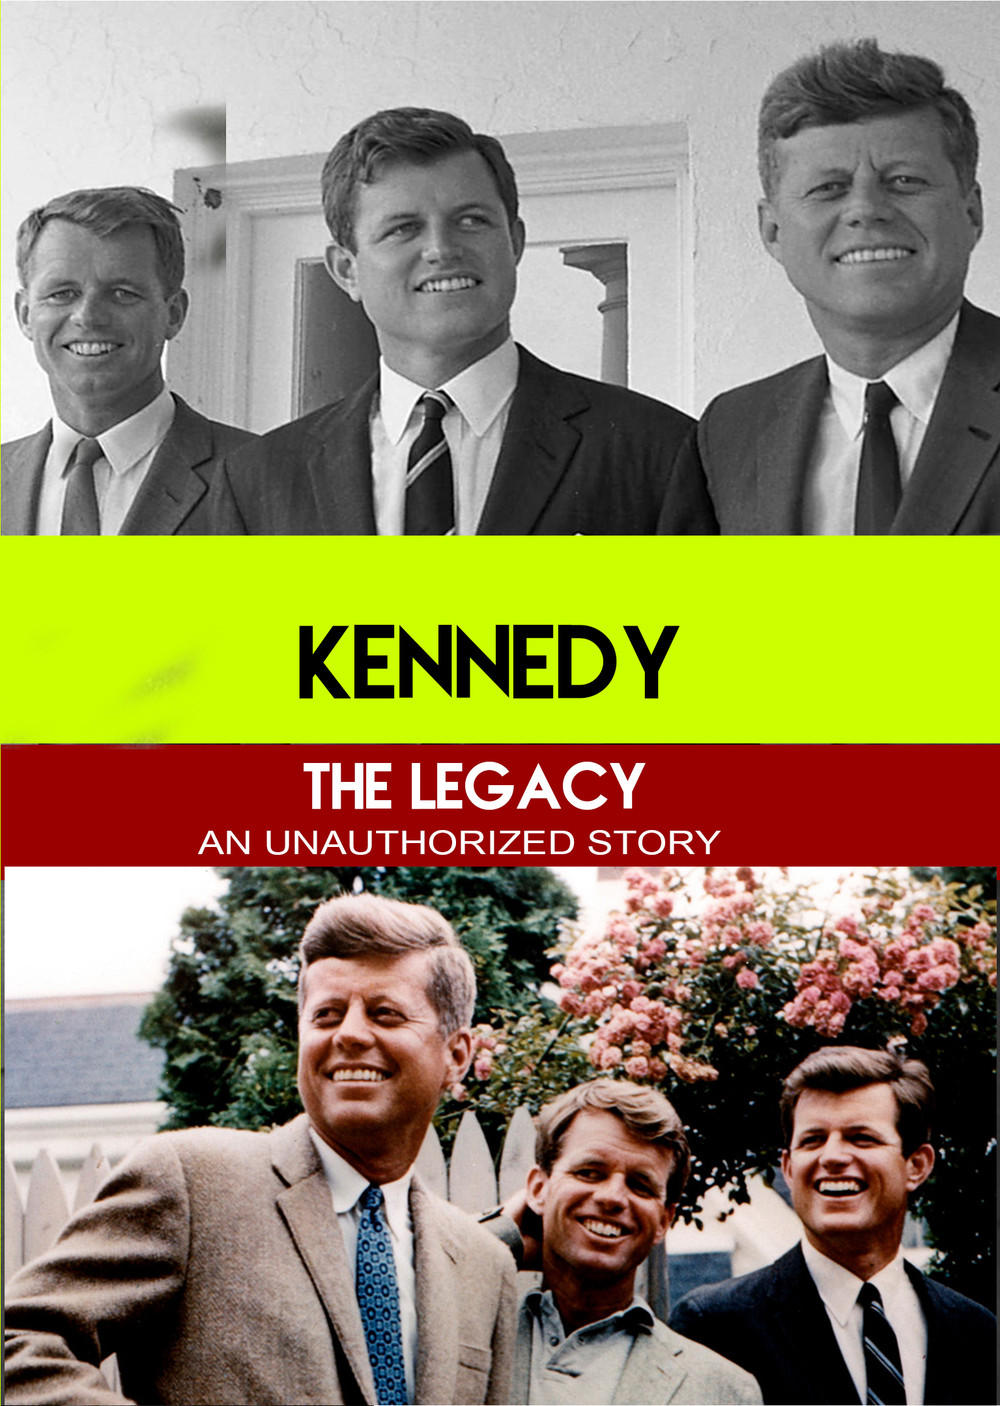 L7807 - Kennedy The Legacy - An Unauthorized Story